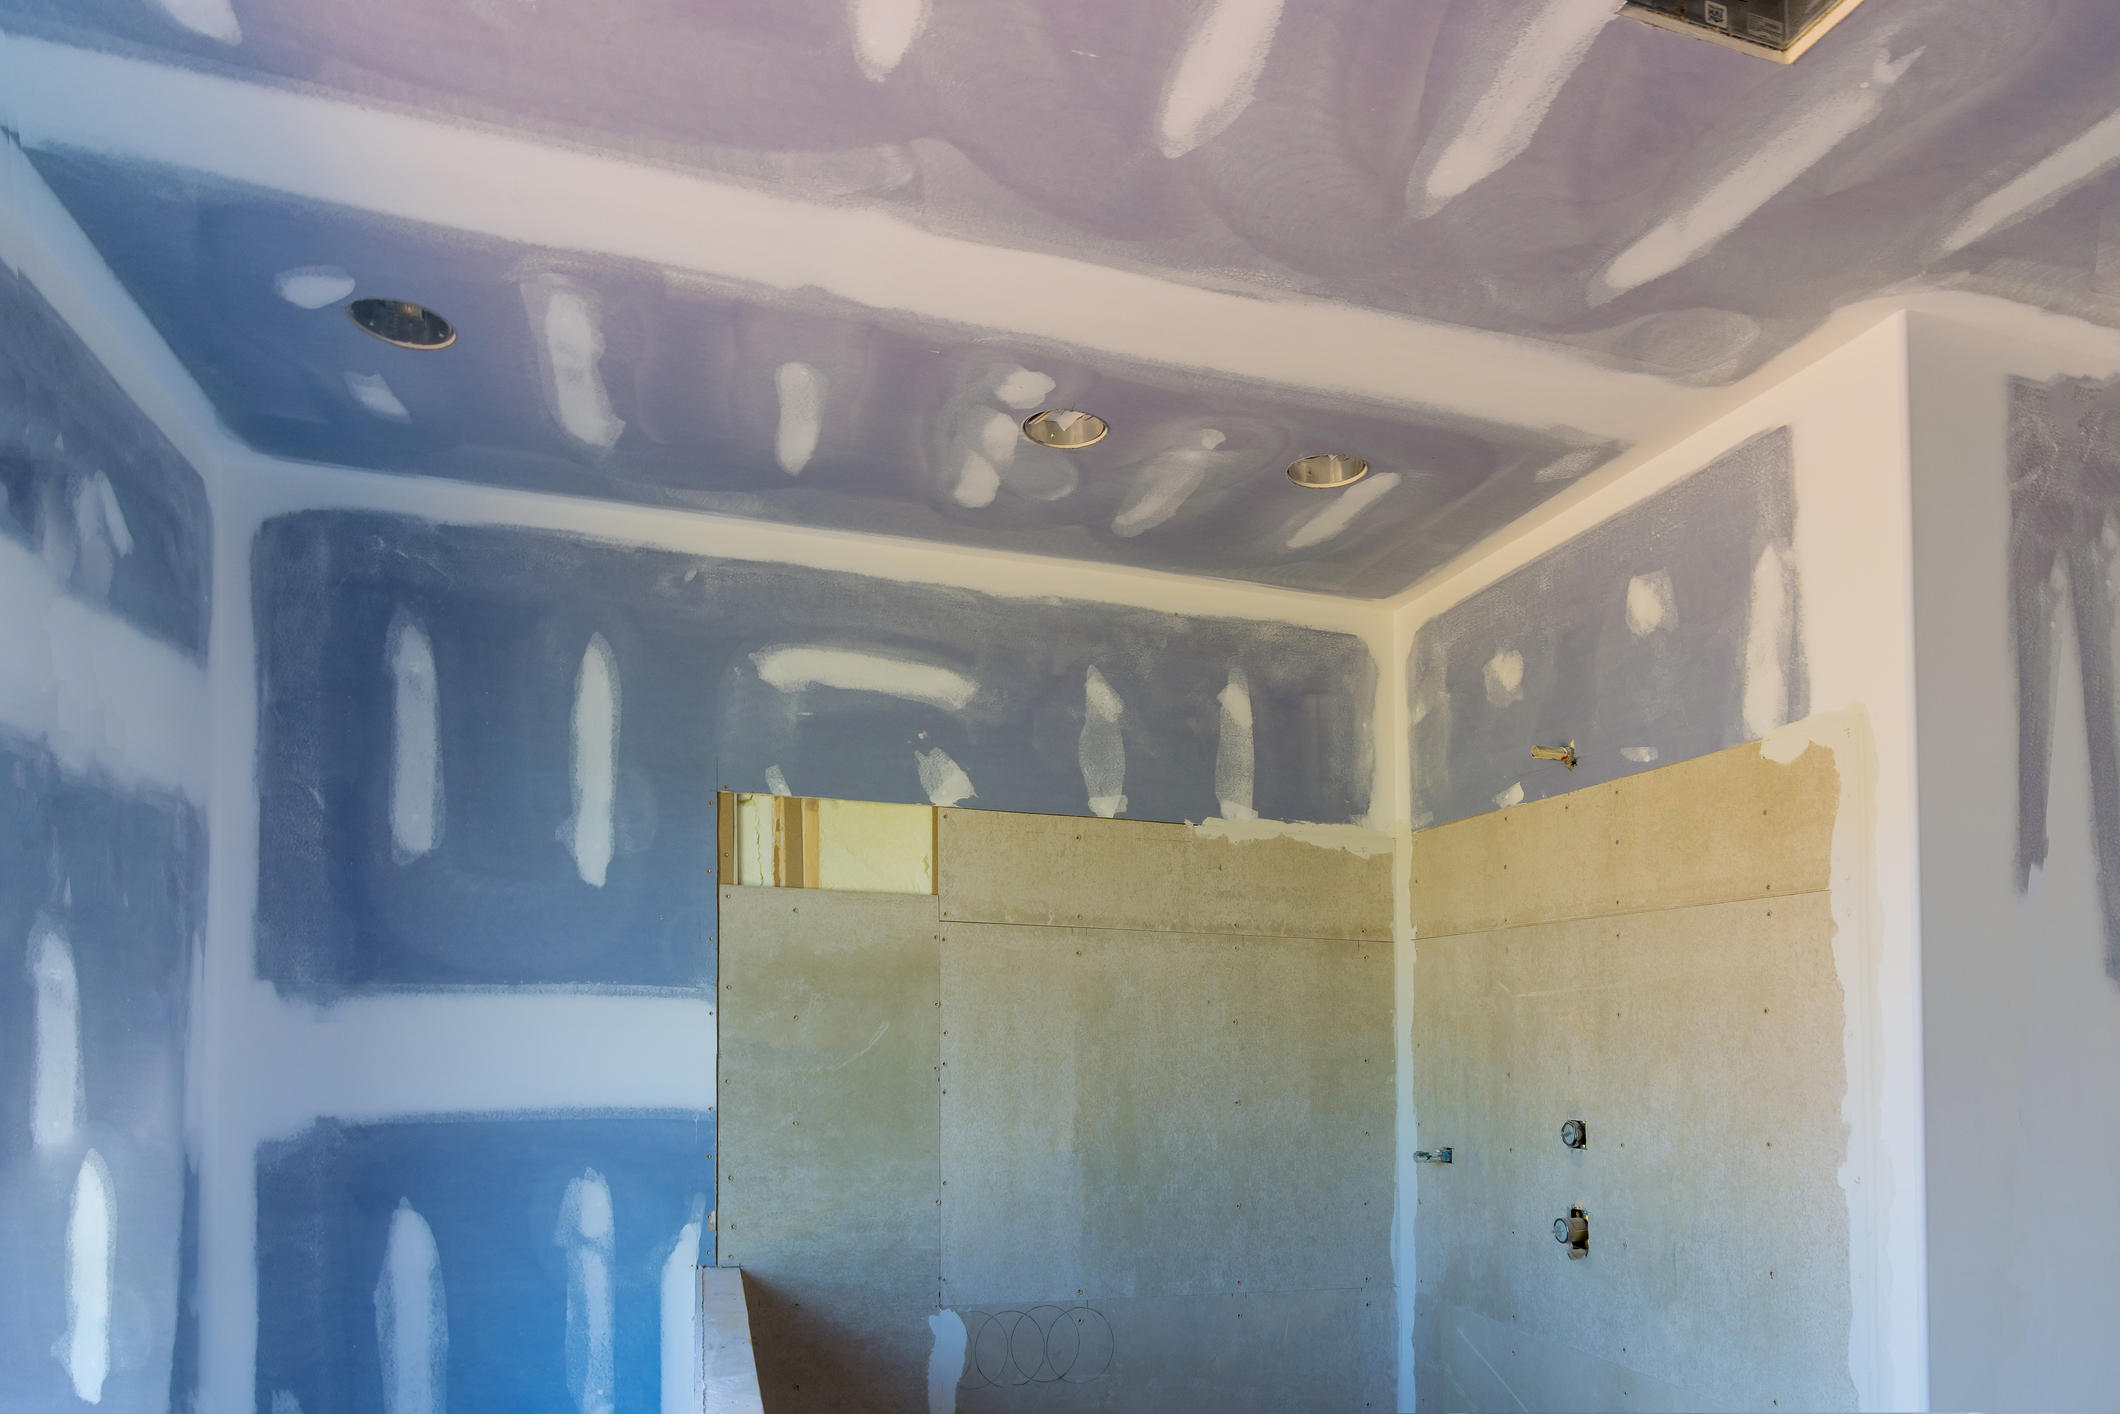 Top Tier Restoration & Remodeling are experts in bathroom remodeling services. We offer a comprehensive range of services to transform your Nassau County bathroom to meet all your wants and needs. Let us build the bathroom of your dreams!